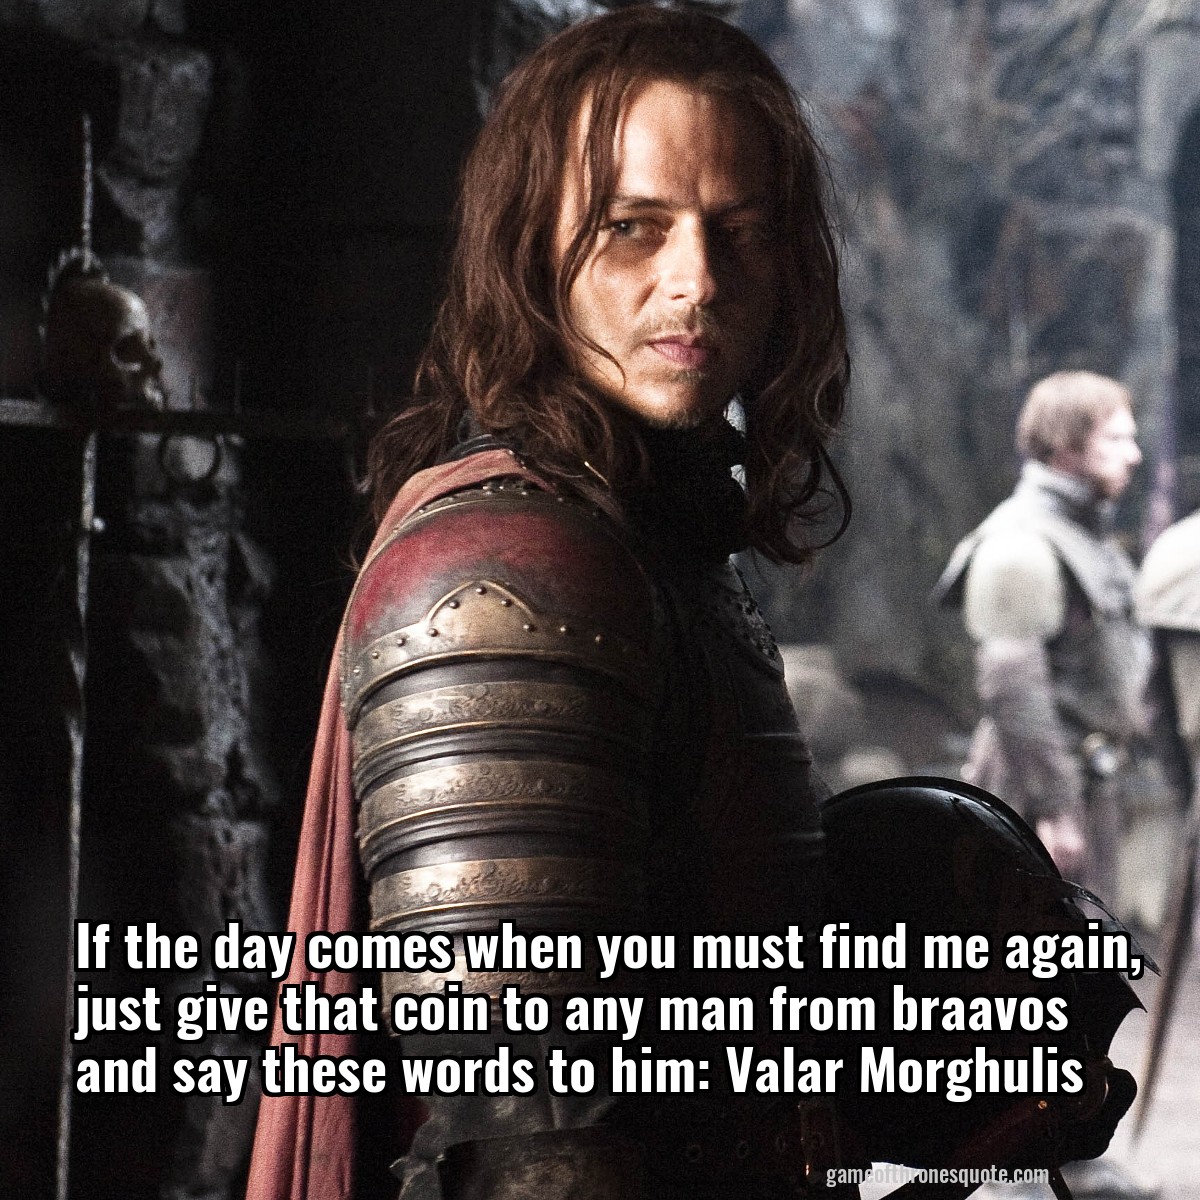 If the day comes when you must find me again, just give that coin to any man from braavos and say these words to him: Valar Morghulis